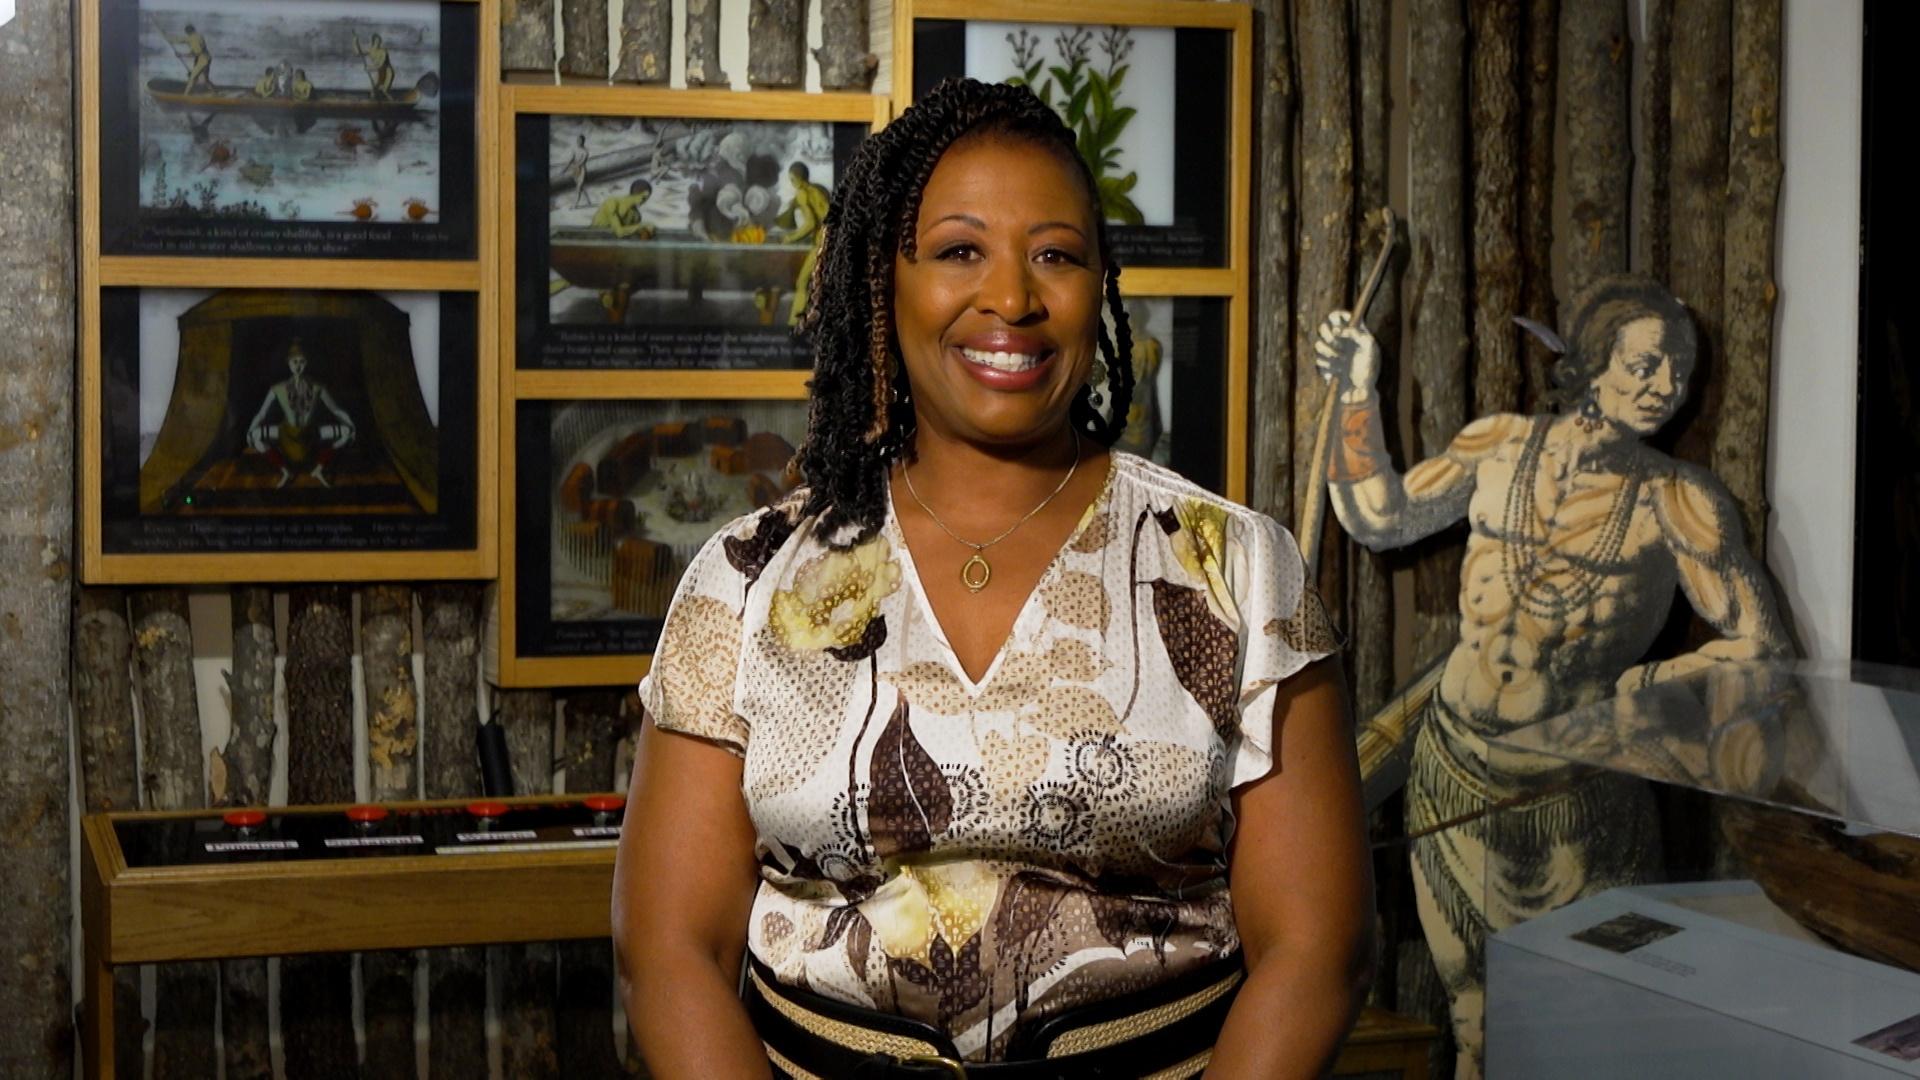 Deborah Holt Noel, host of NC Weekend in front some framed art and a cut out of a wood-print styled warrior.